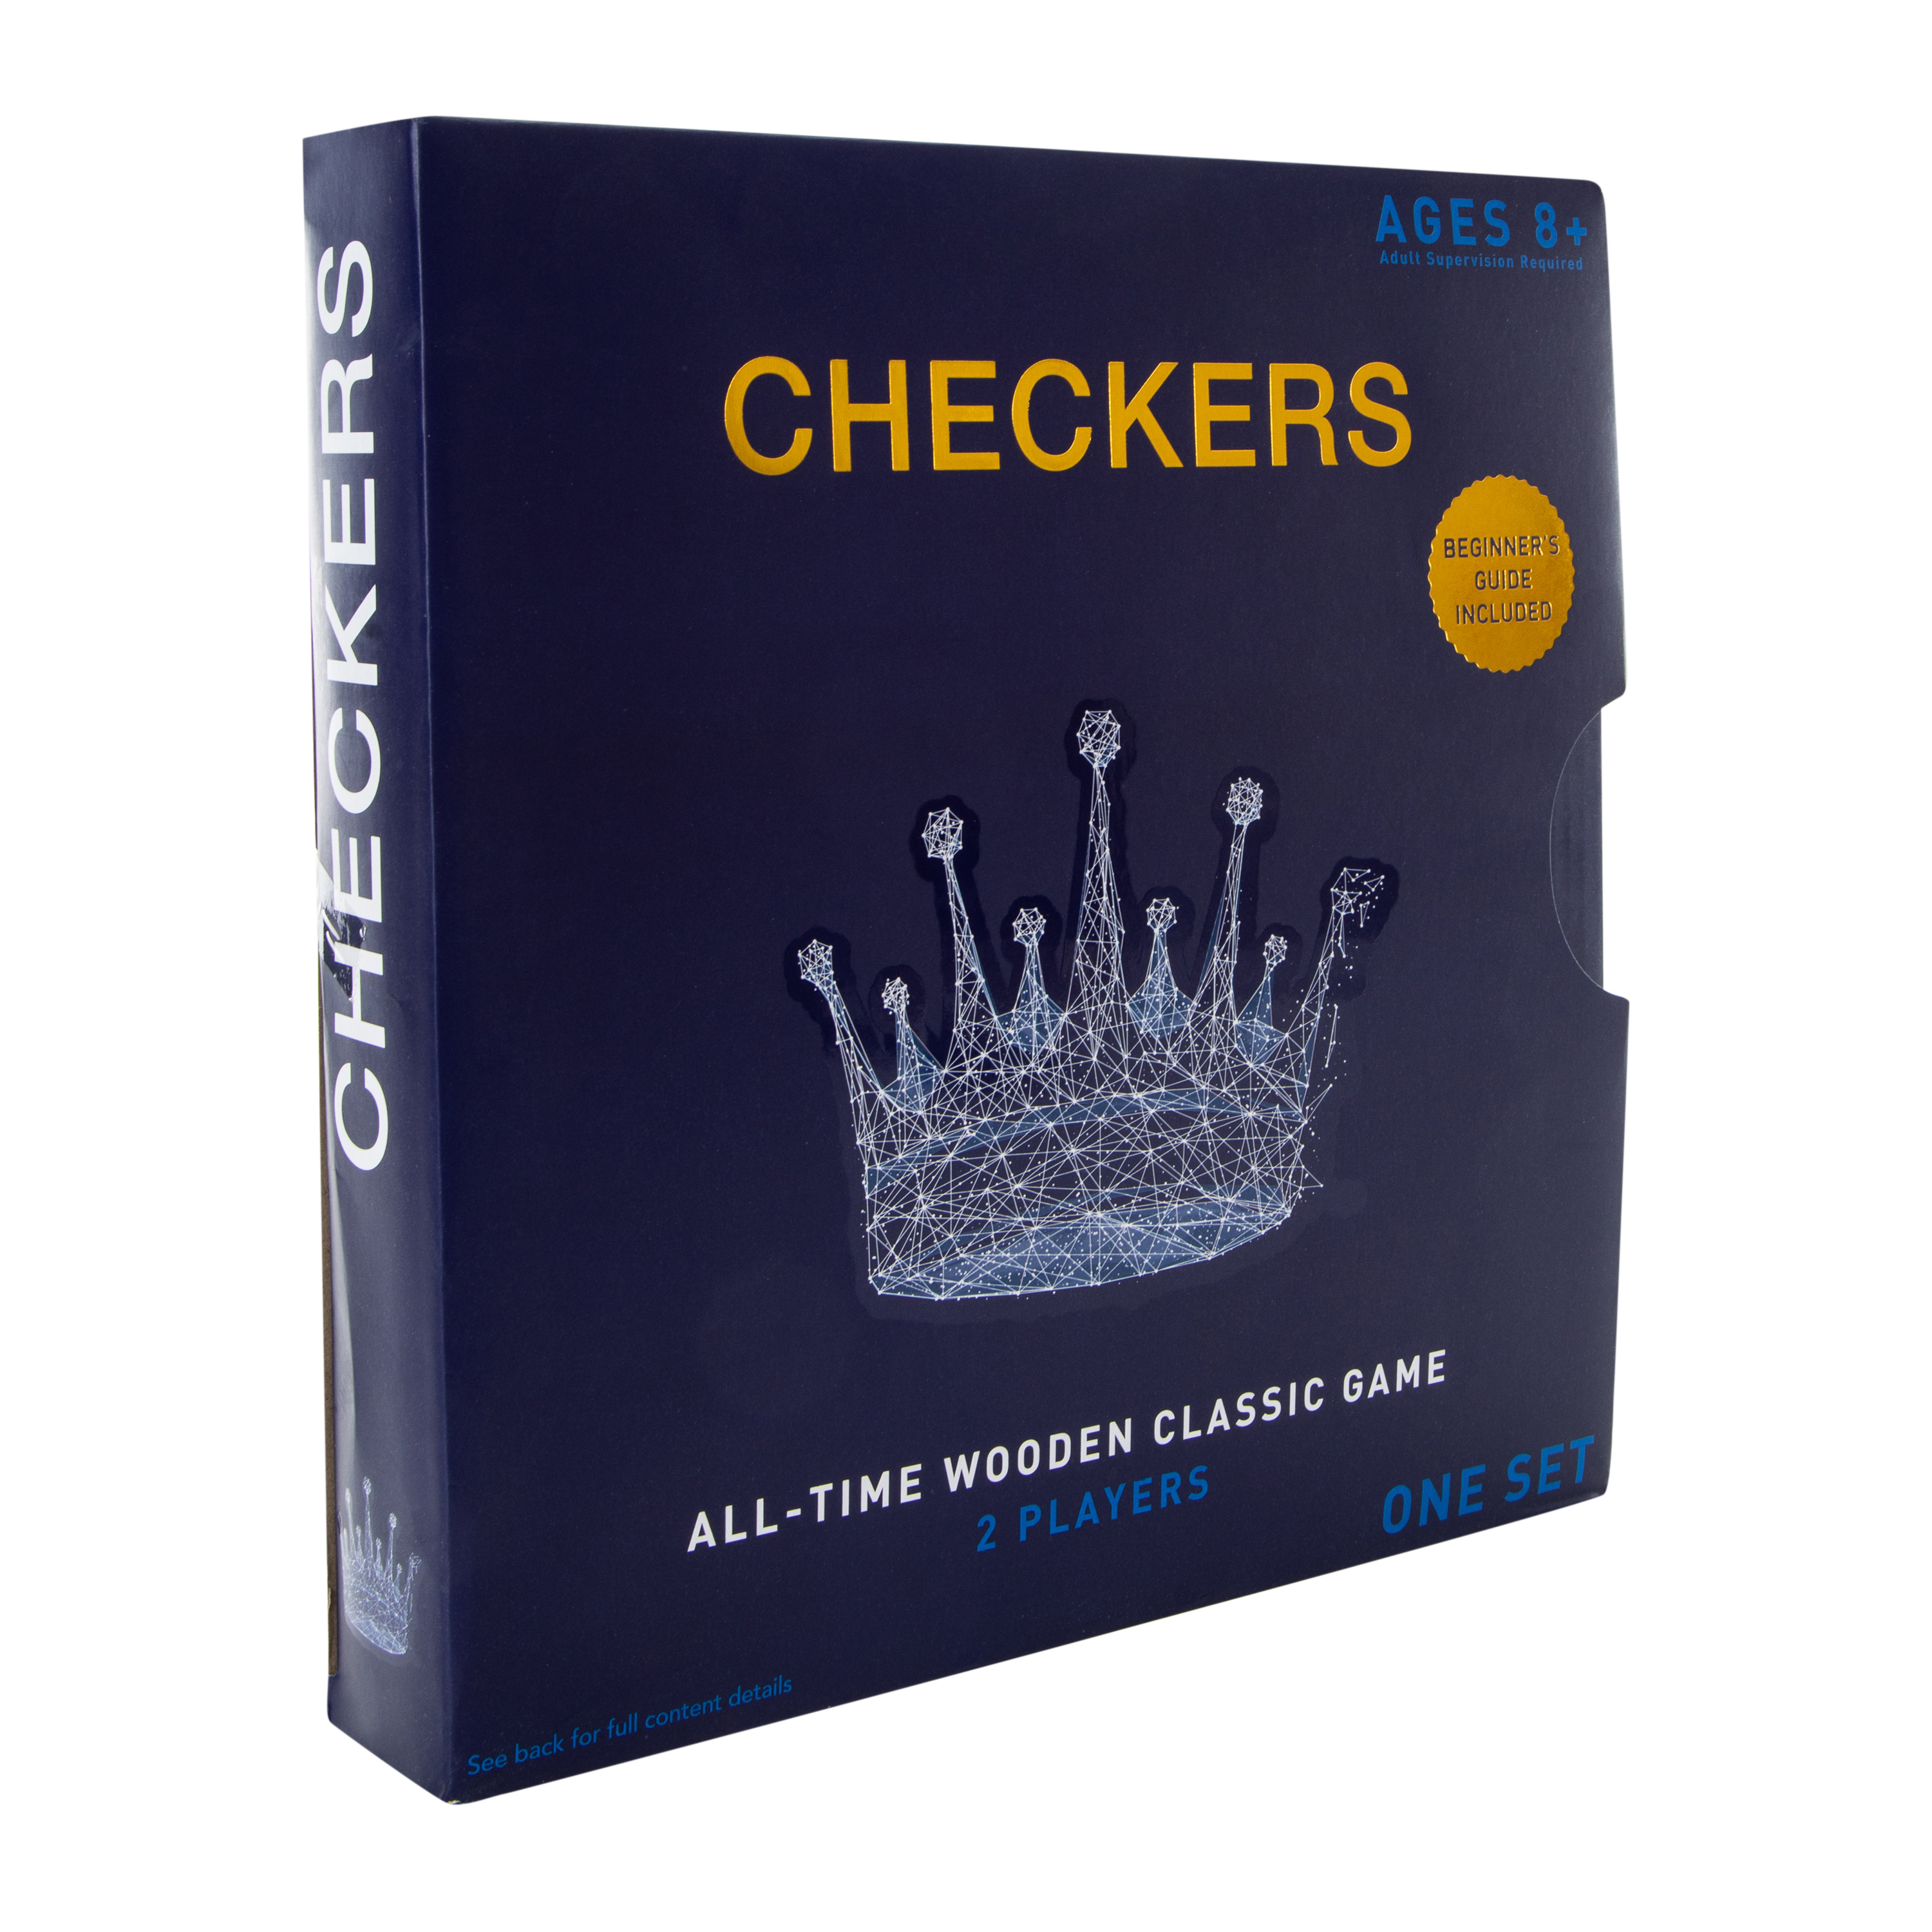 Checkers All-Time Wooden Classic Game